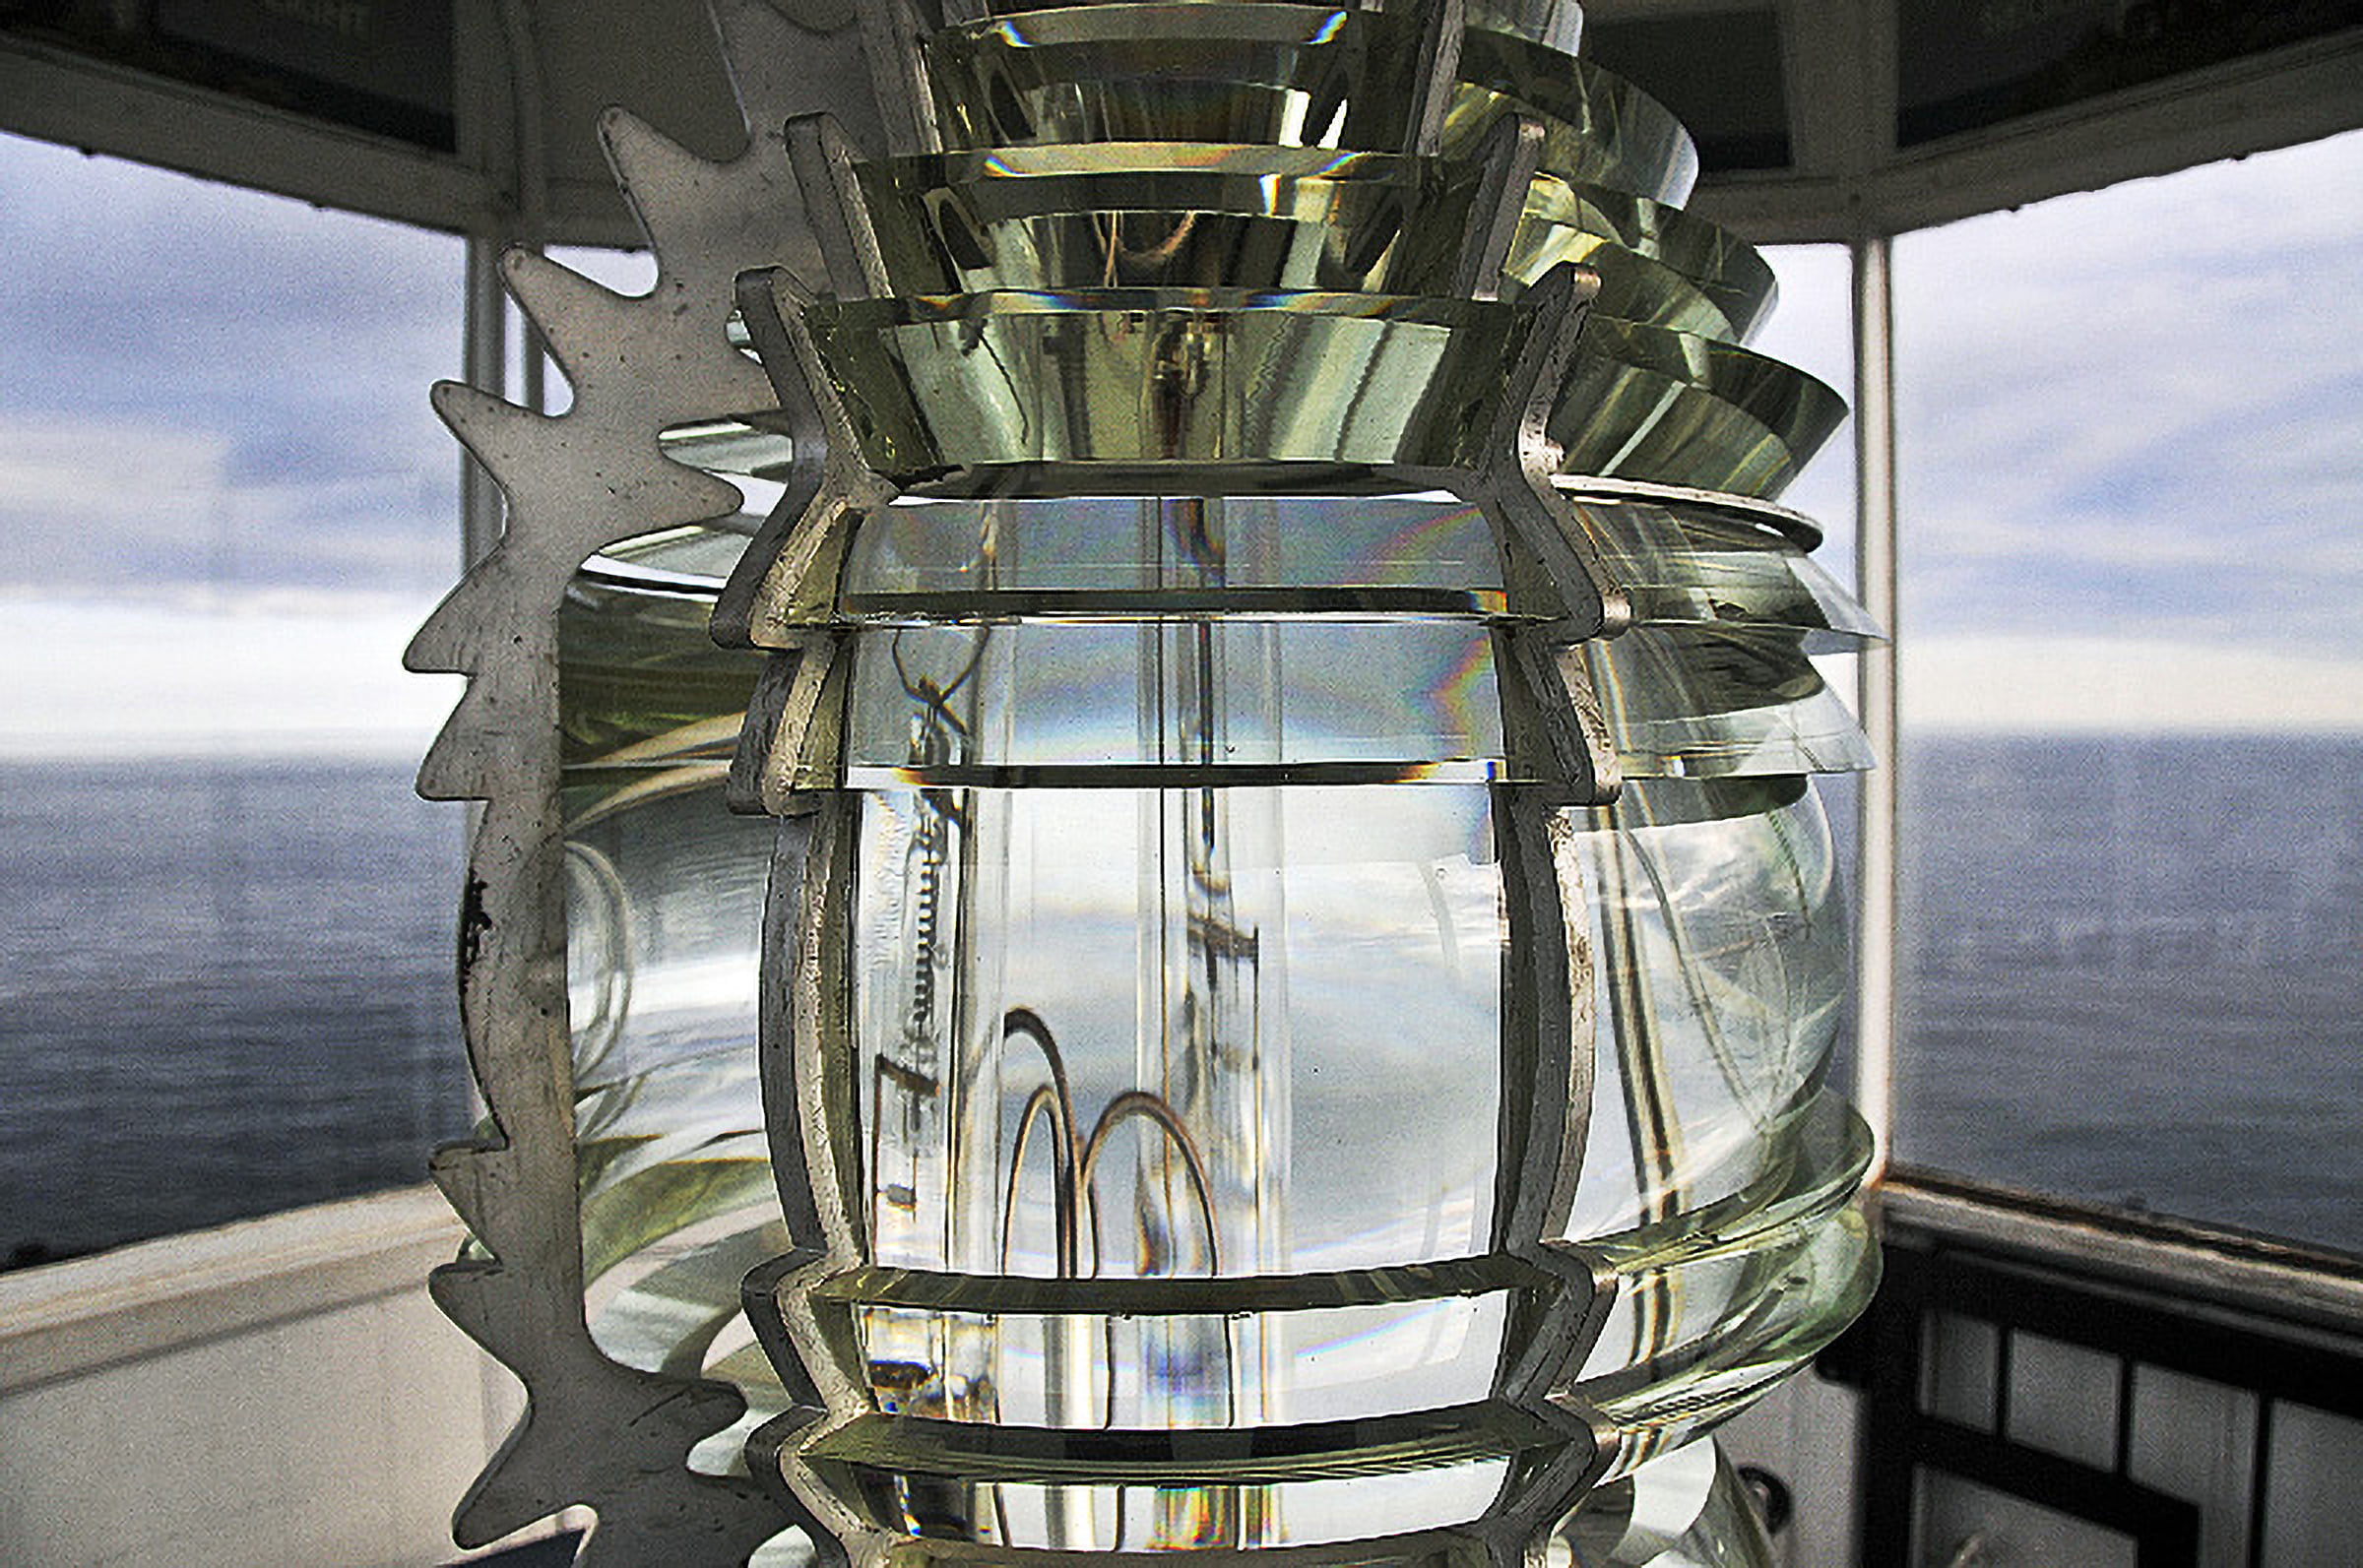 An image of a Fresnel lens reflecting the sky.